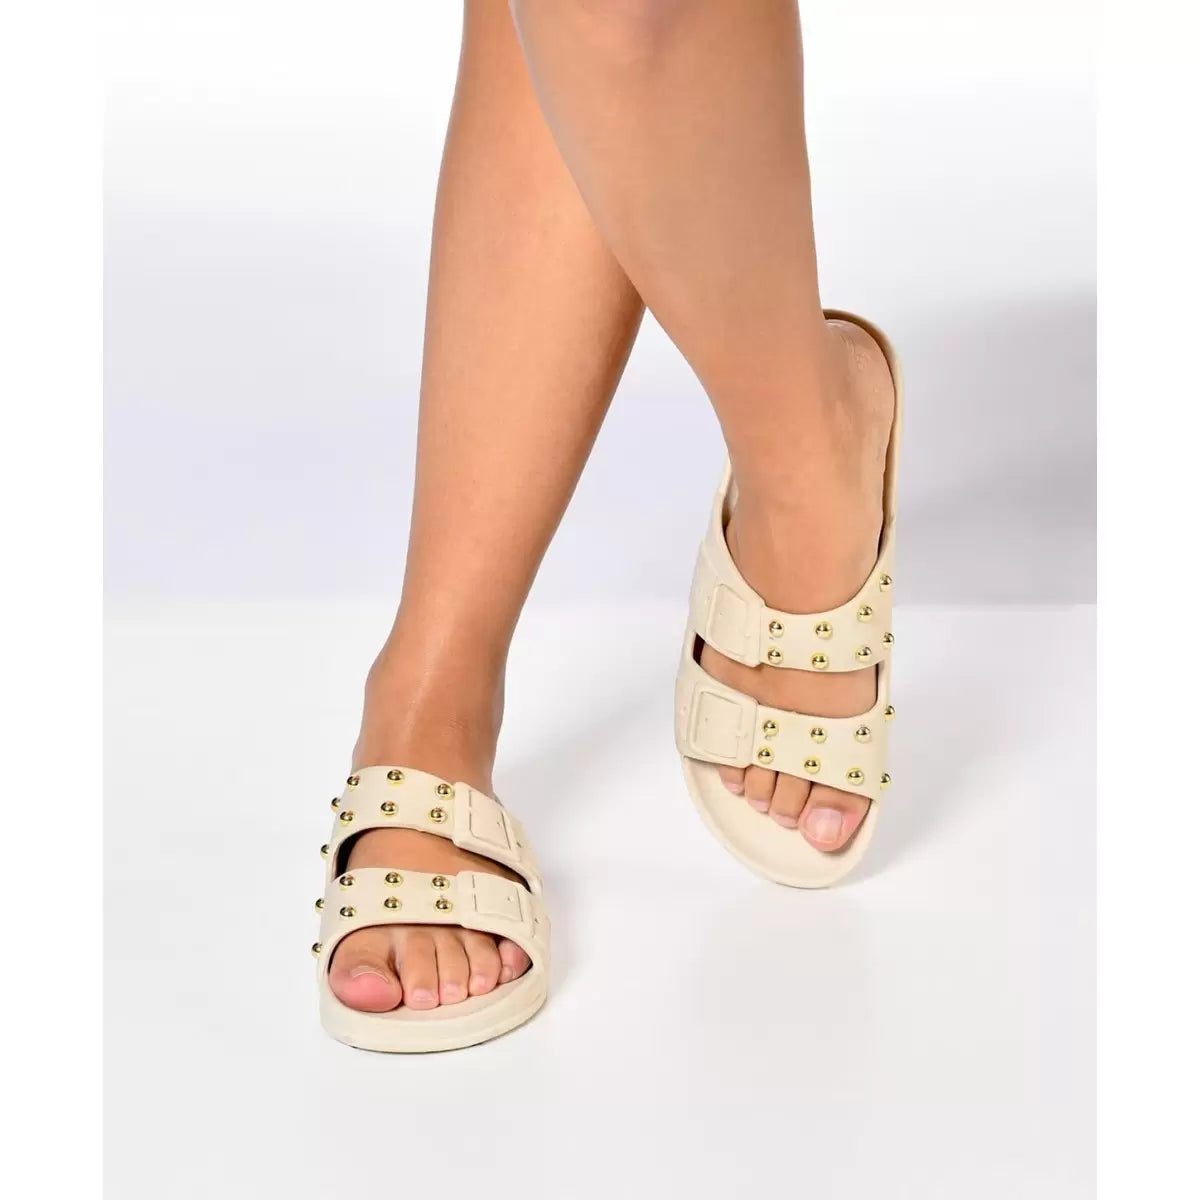 Florianopolis Studded Rubber Sandal in craie by Cacatoes